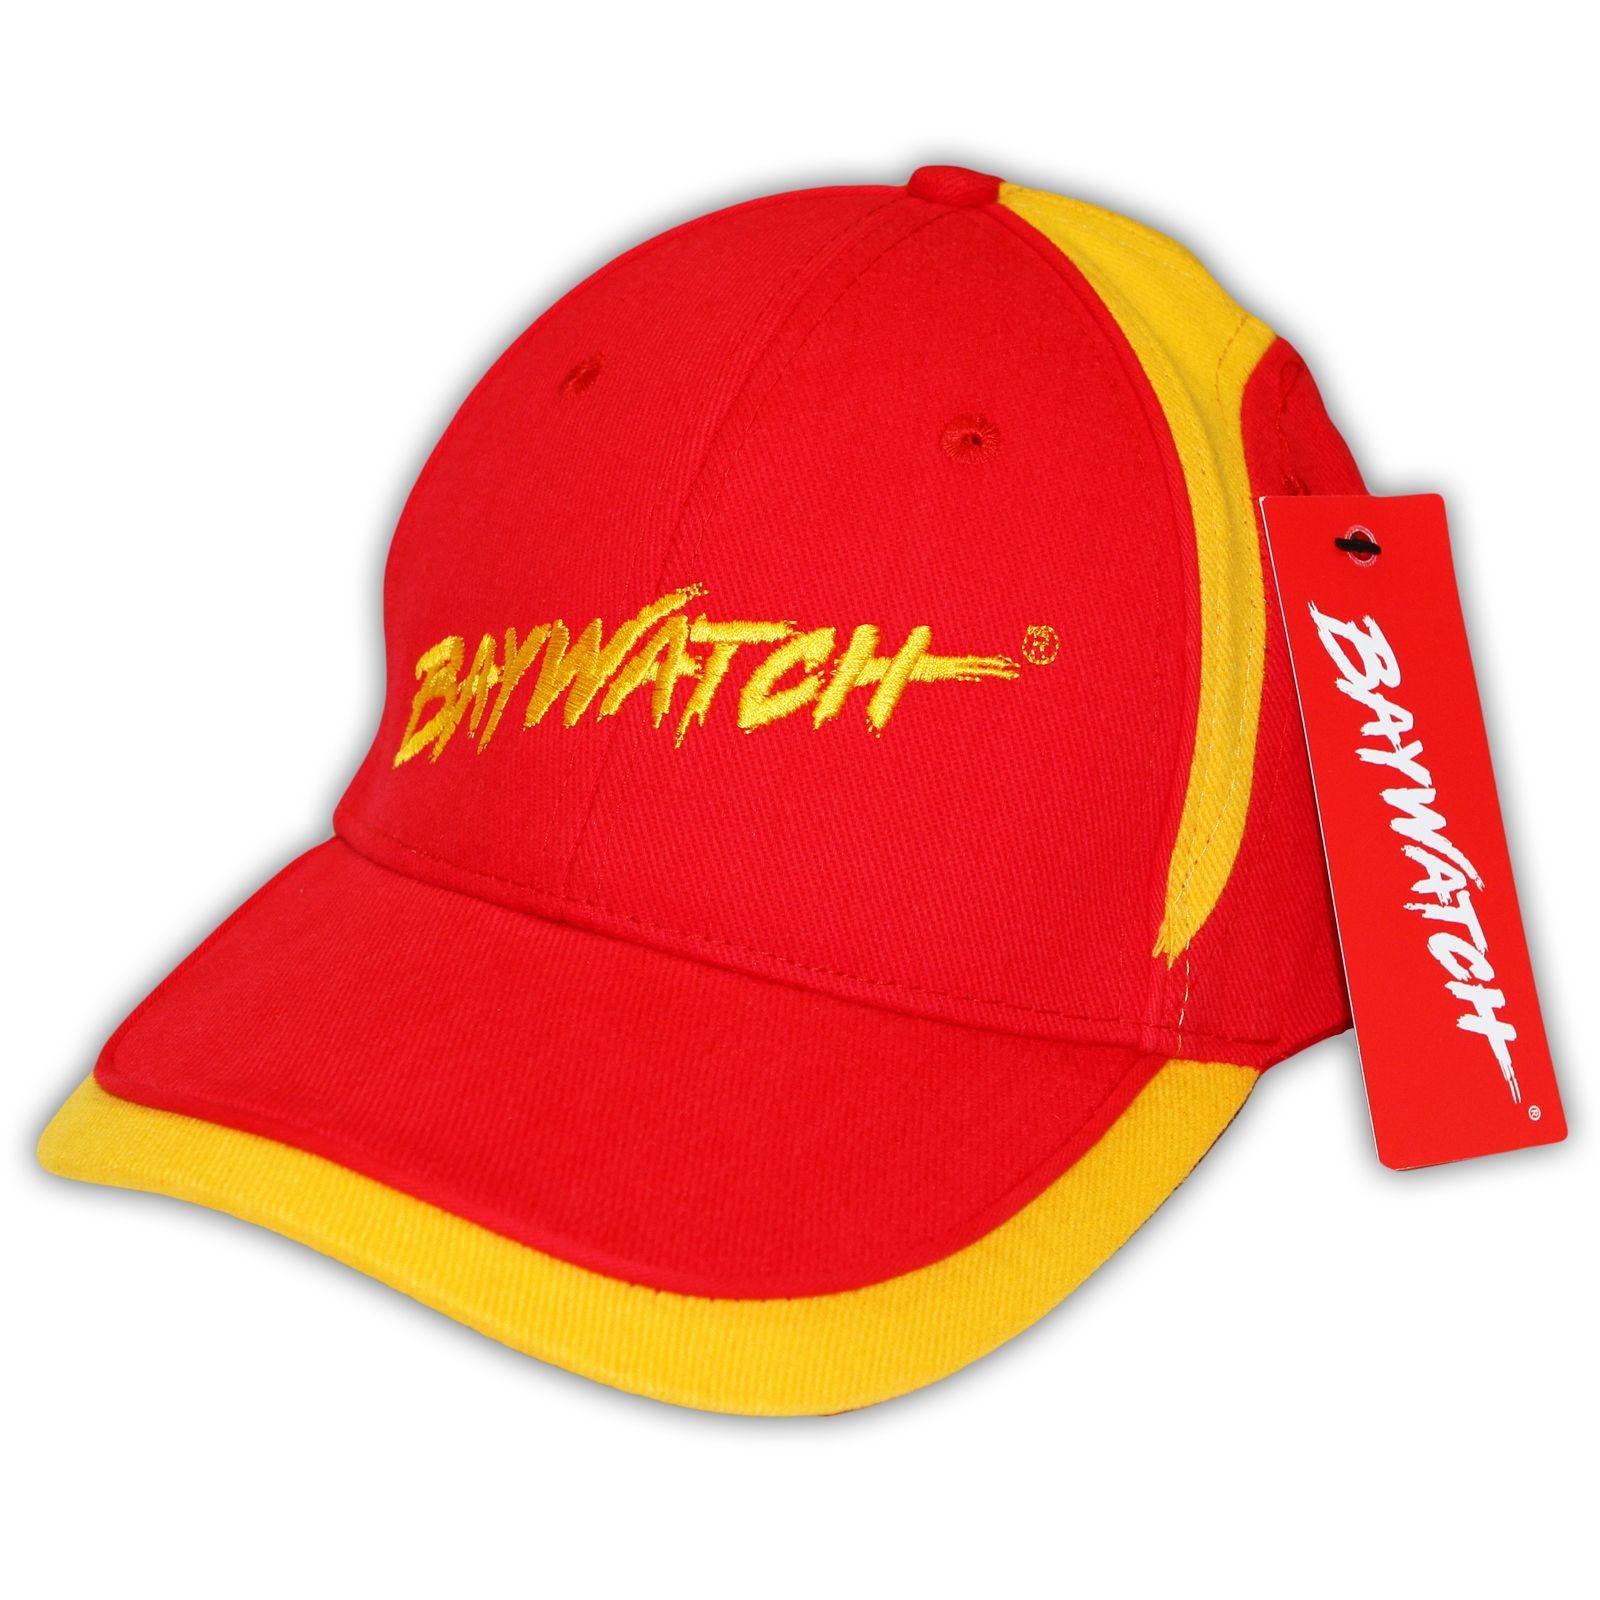 Red and Yellow P Logo - LICENSED BAYWATCH RED YELLOW CAP